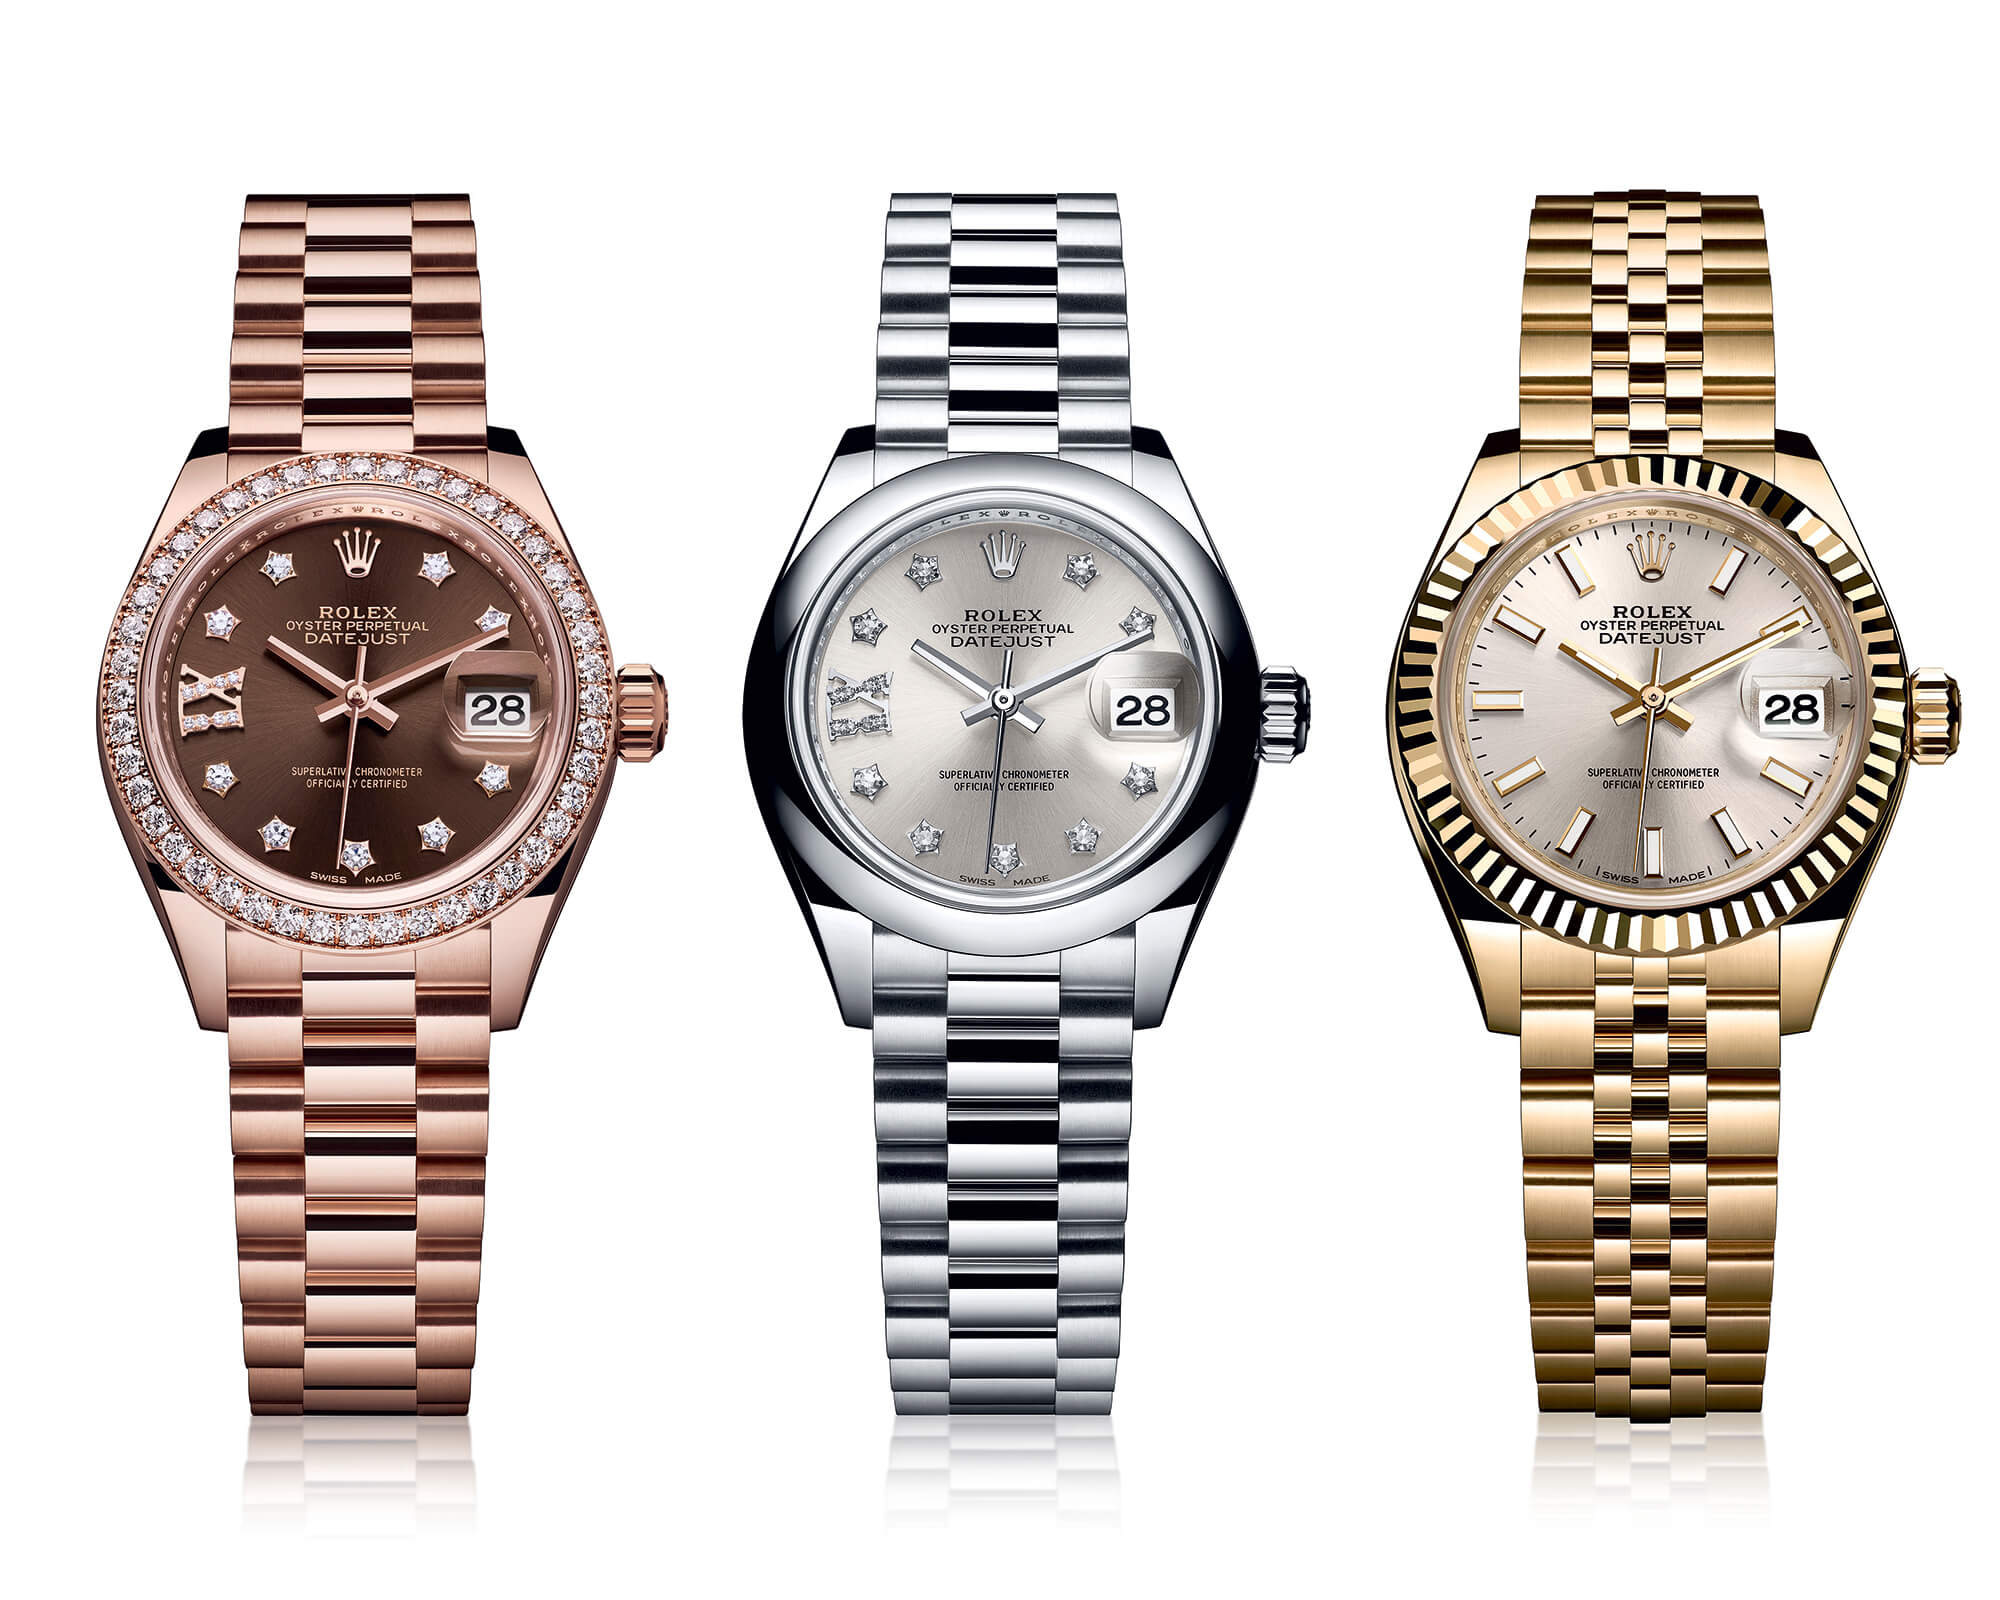 rolex oyster perpetual datejust woman